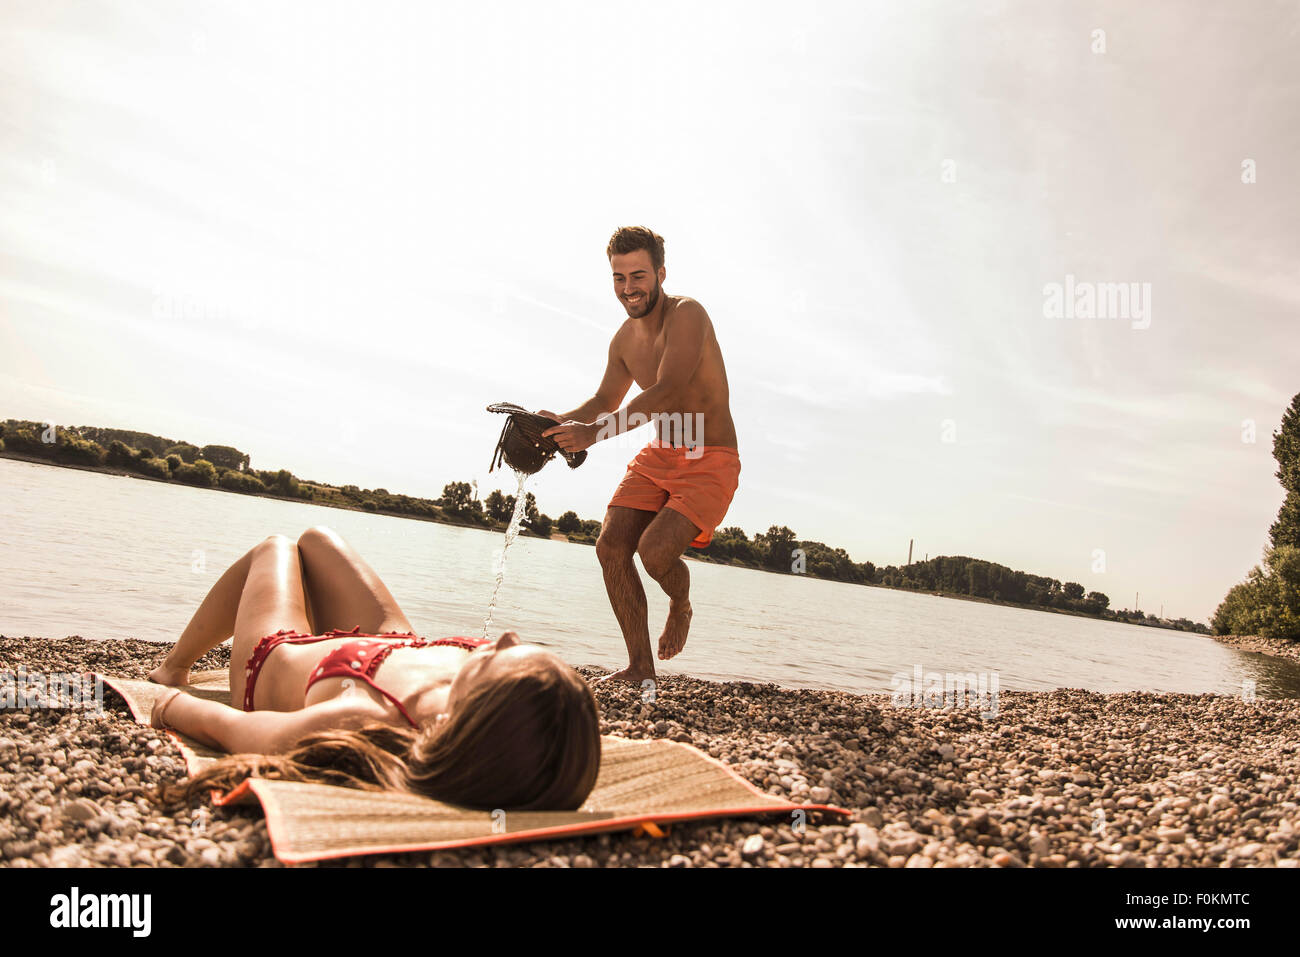 Playful young man trying to pour water over girlfriend sunbathing by the riverside Stock Photo